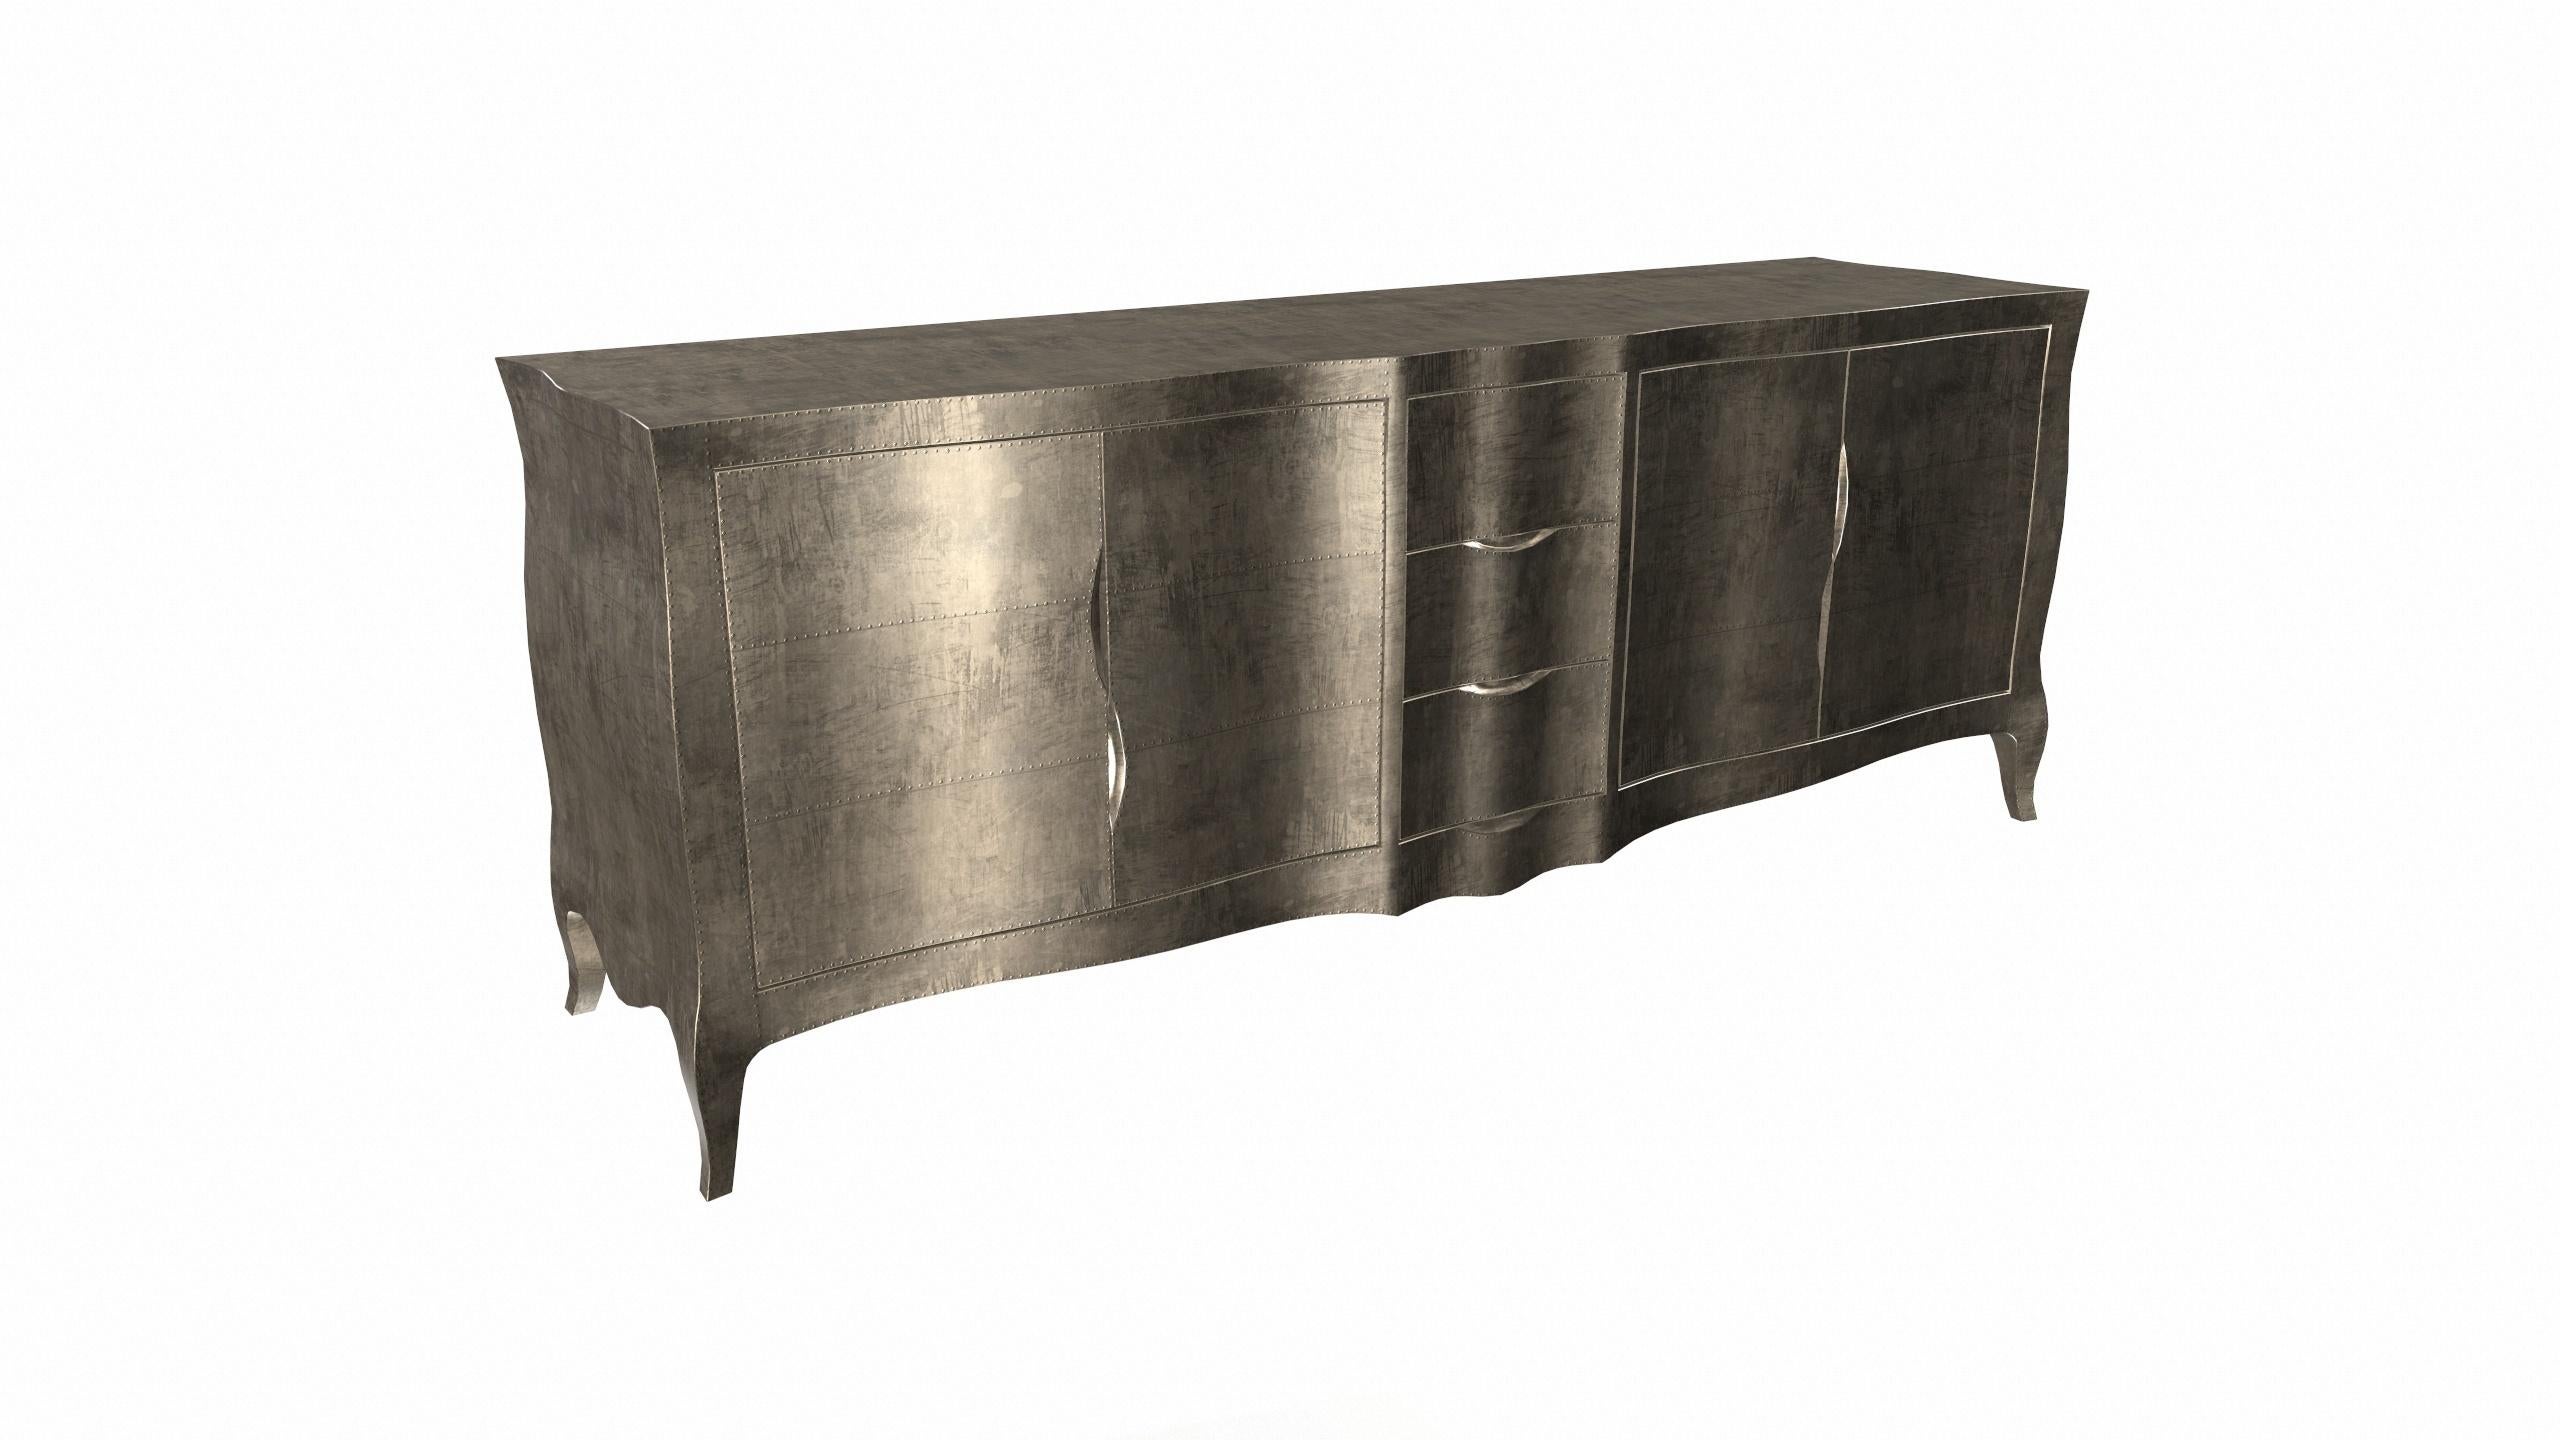 Contemporary Louise Credenza Art Deco Bookcases in Smooth Antique Bronze by Paul Mathieu For Sale